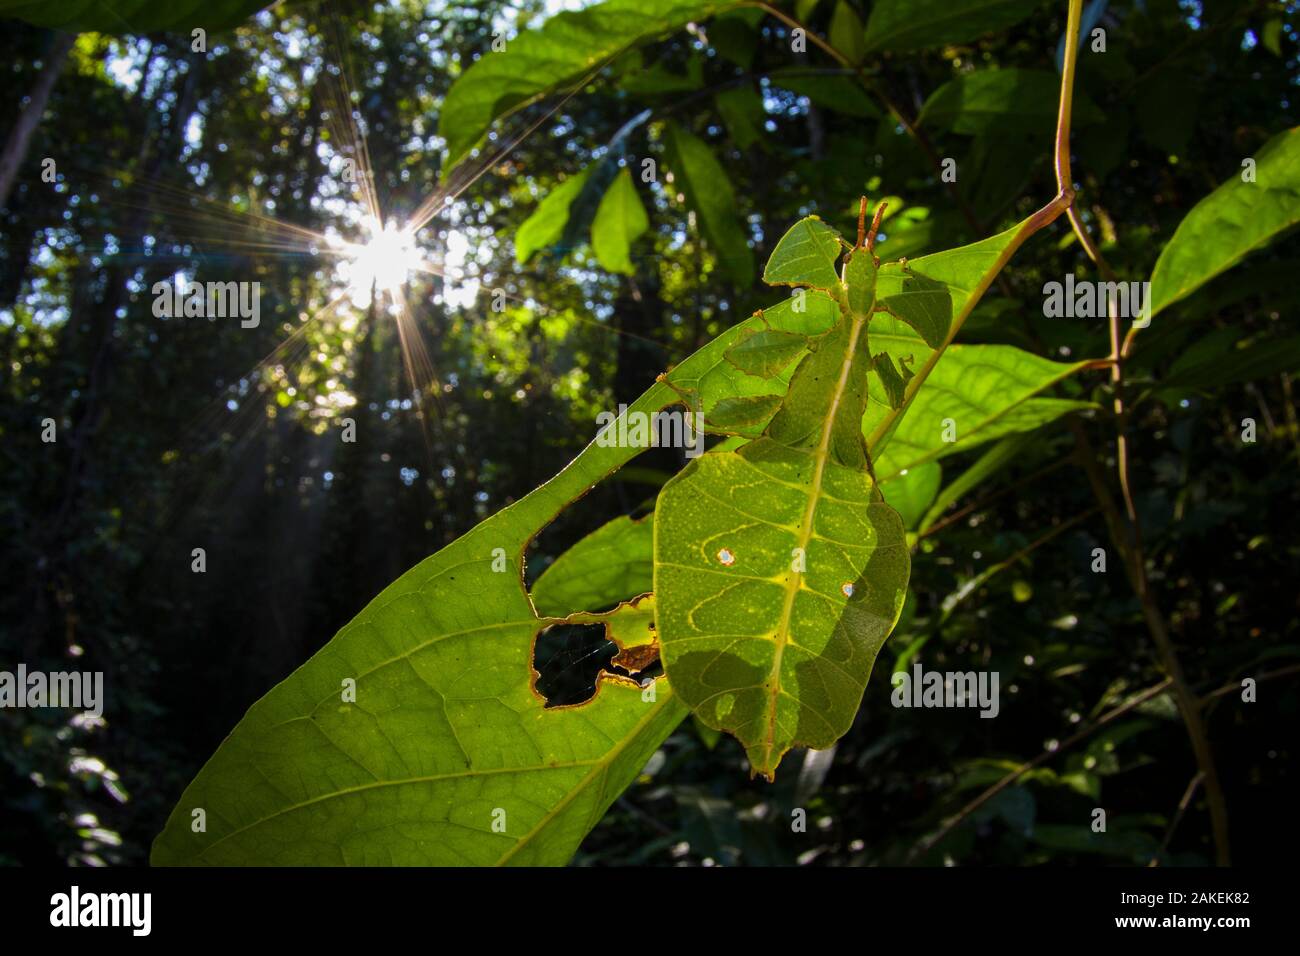 Leaf insect (Phyllium sp.) camouflaged in rainforest, Mulu National Park, Borneo. Stock Photo